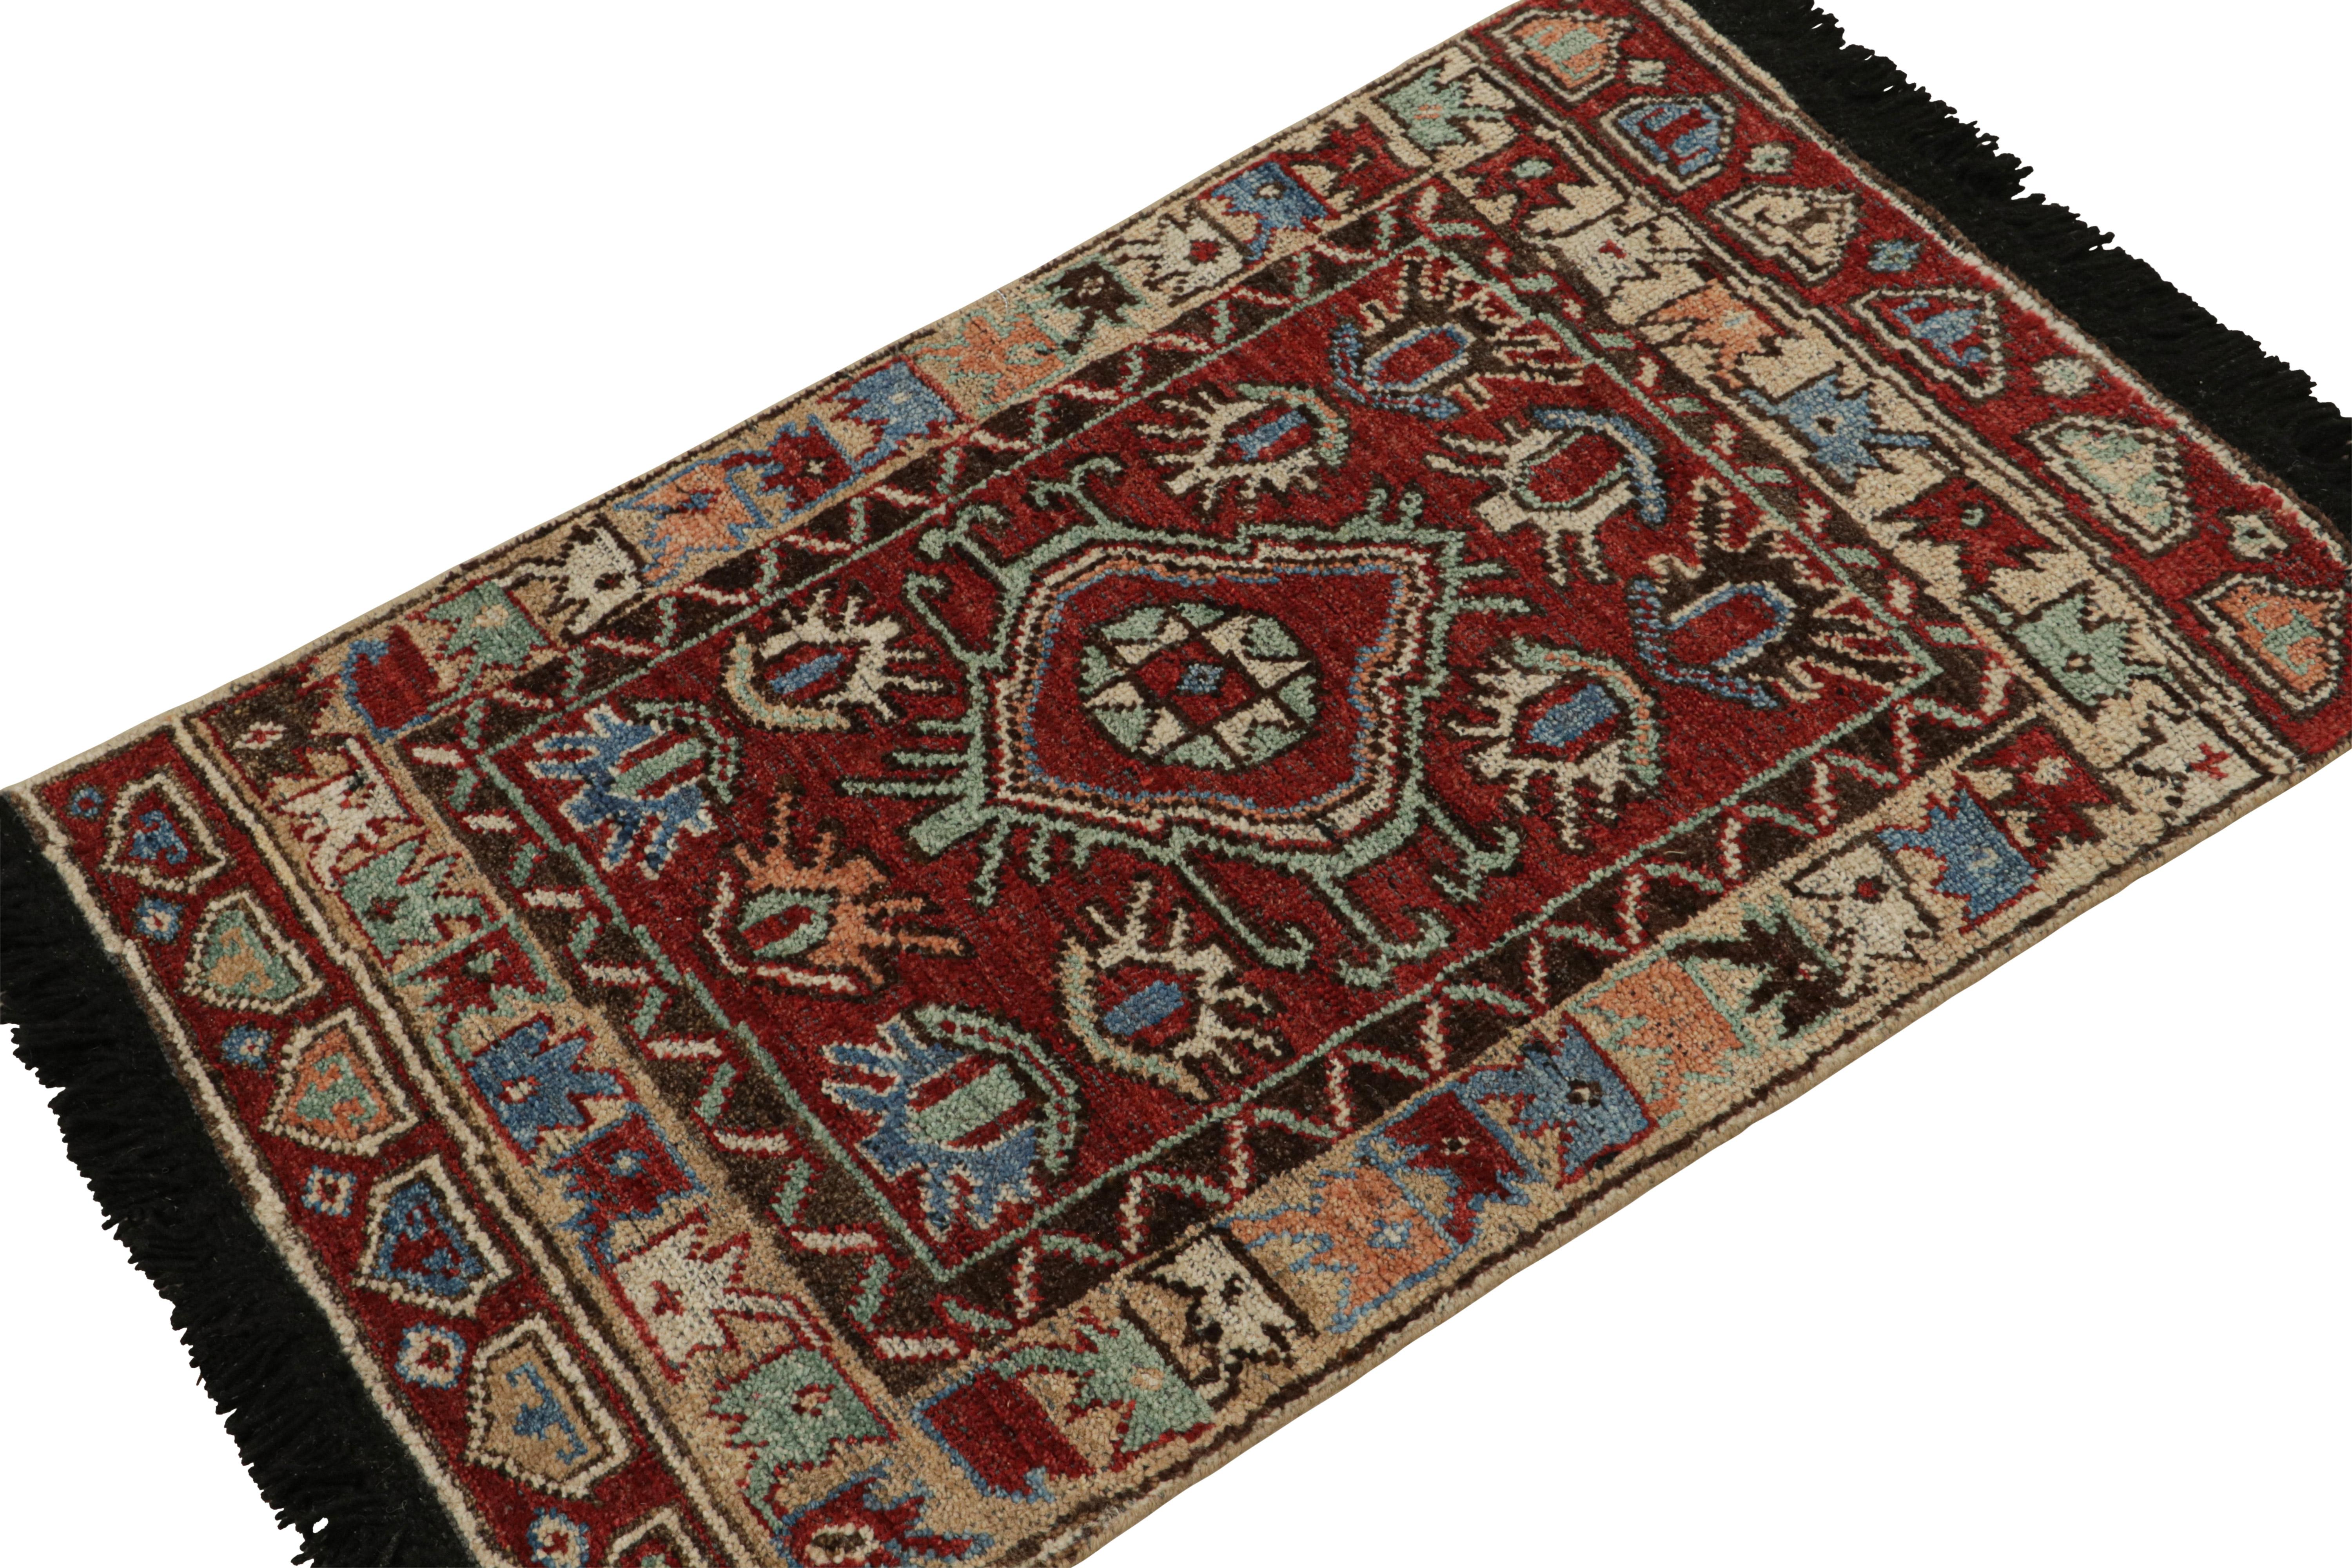 Indian Rug & Kilim’s Antique Tribal Style Rug in Red with Geometric Patterns For Sale